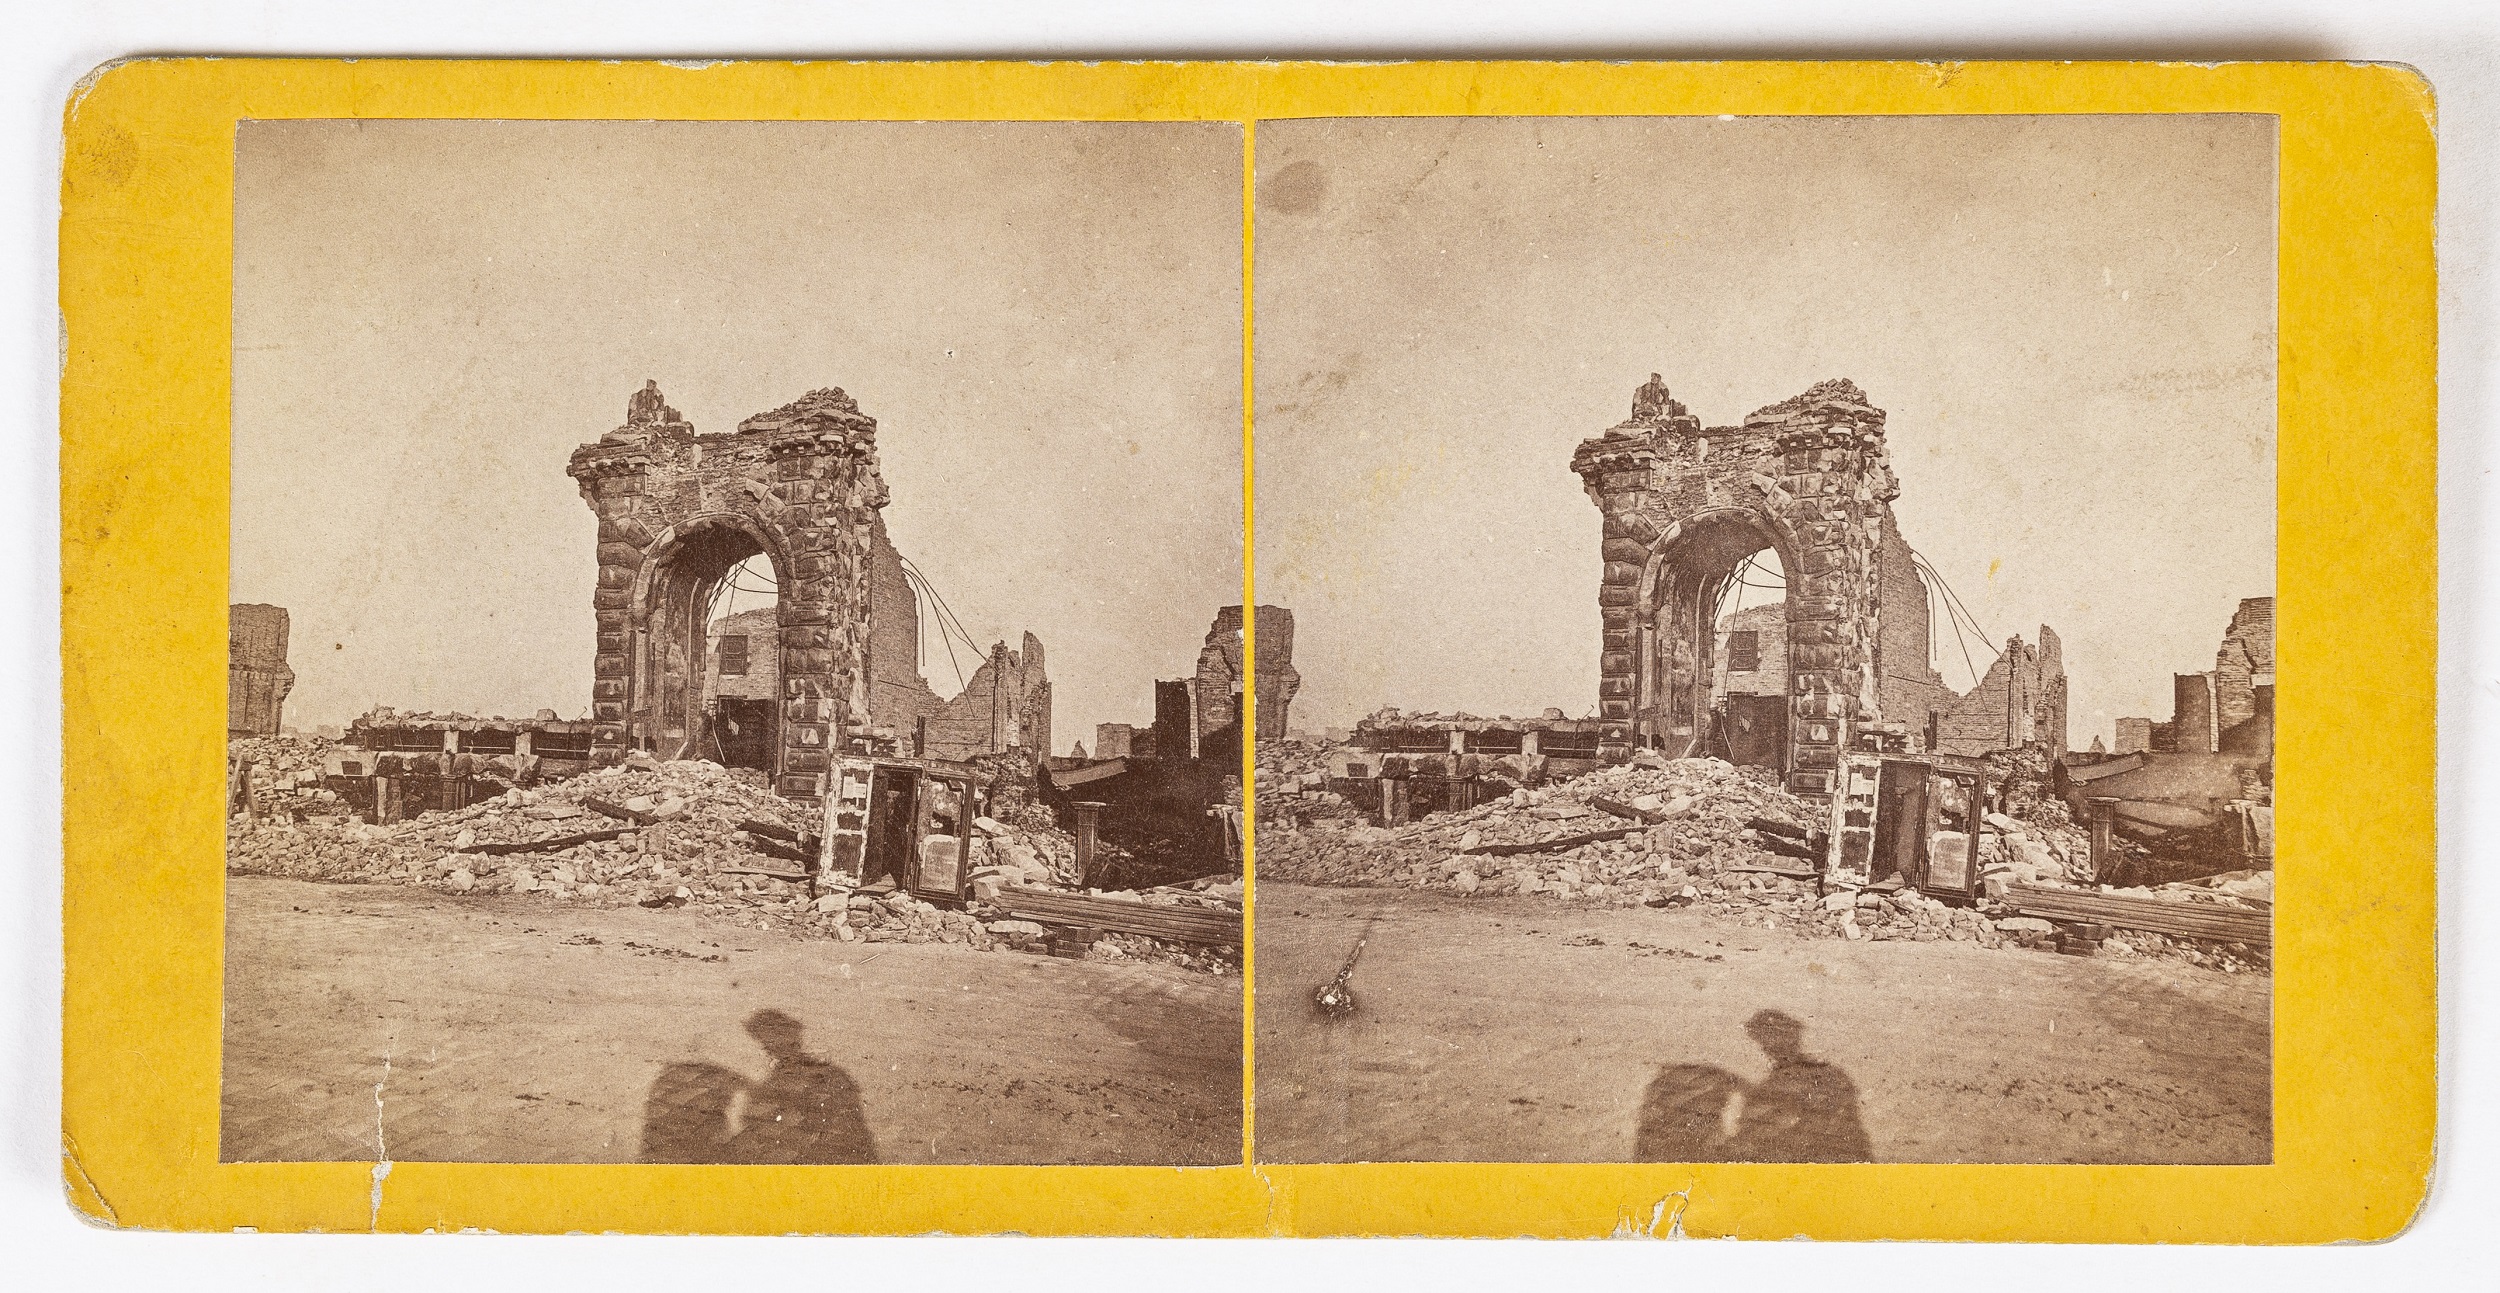 Photographic stereoview of a building ruined by fire